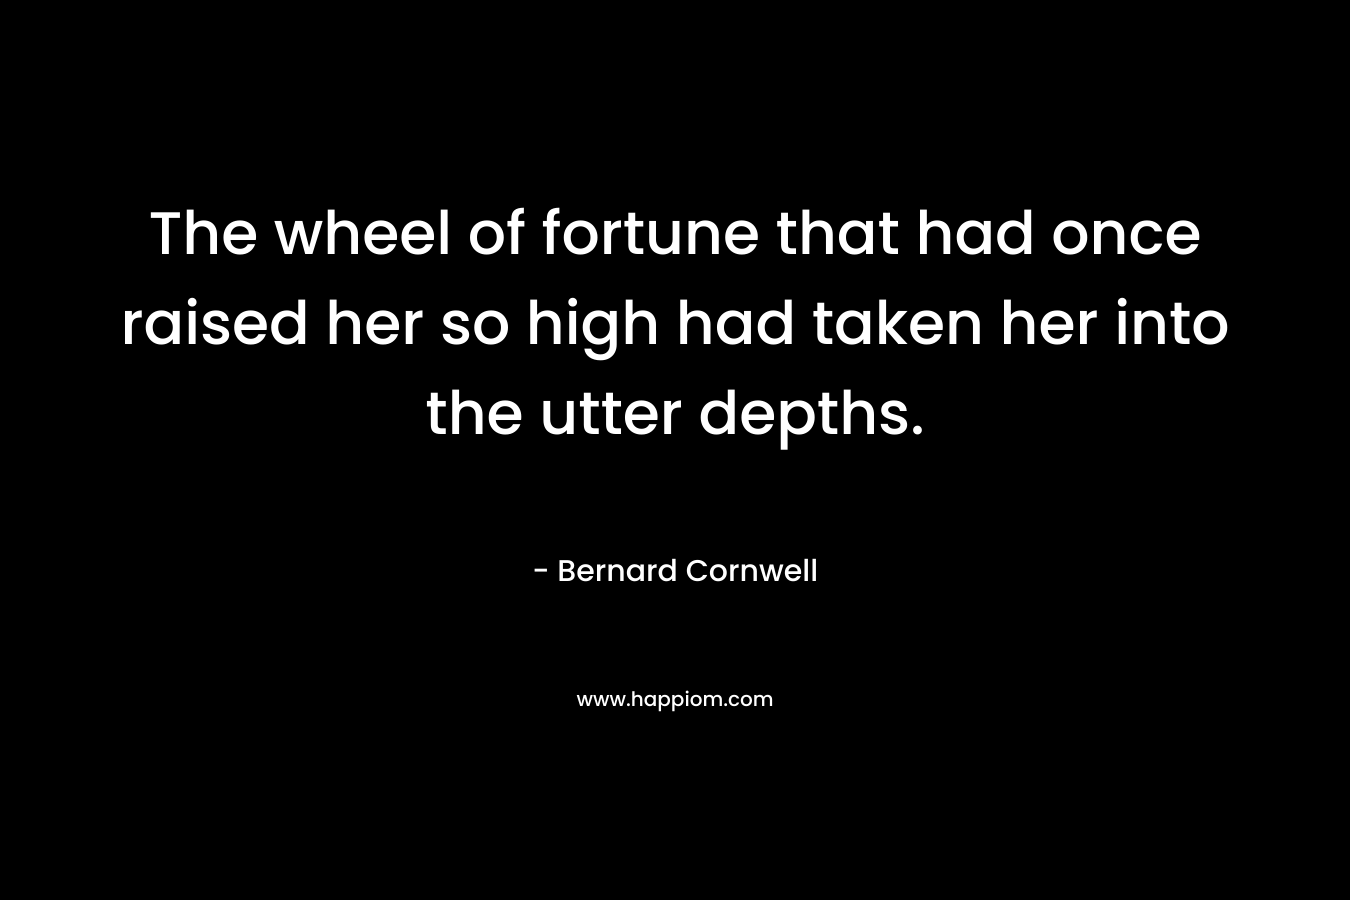 The wheel of fortune that had once raised her so high had taken her into the utter depths. – Bernard Cornwell